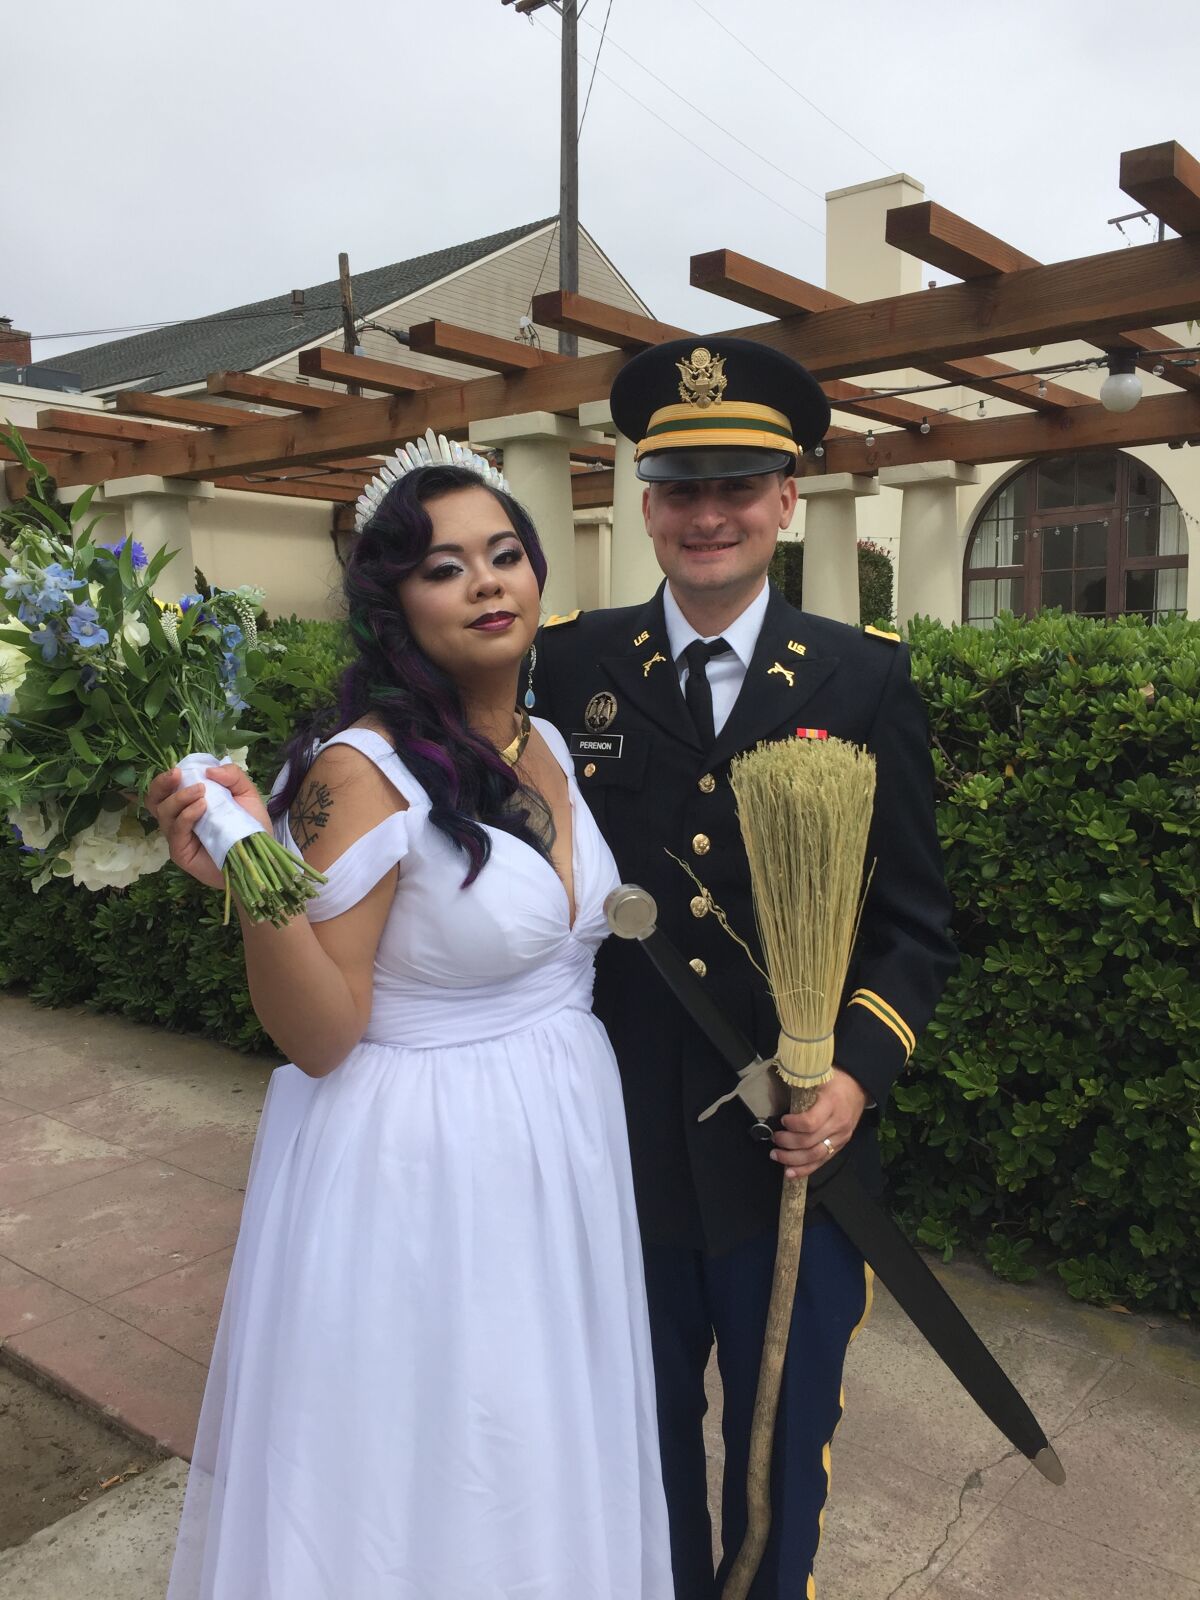 Thanks to his scooter ride, Levitan was able to meet U.S. Army Cadet Captain Shiloh Perenon and his lovely new bride, Lily.